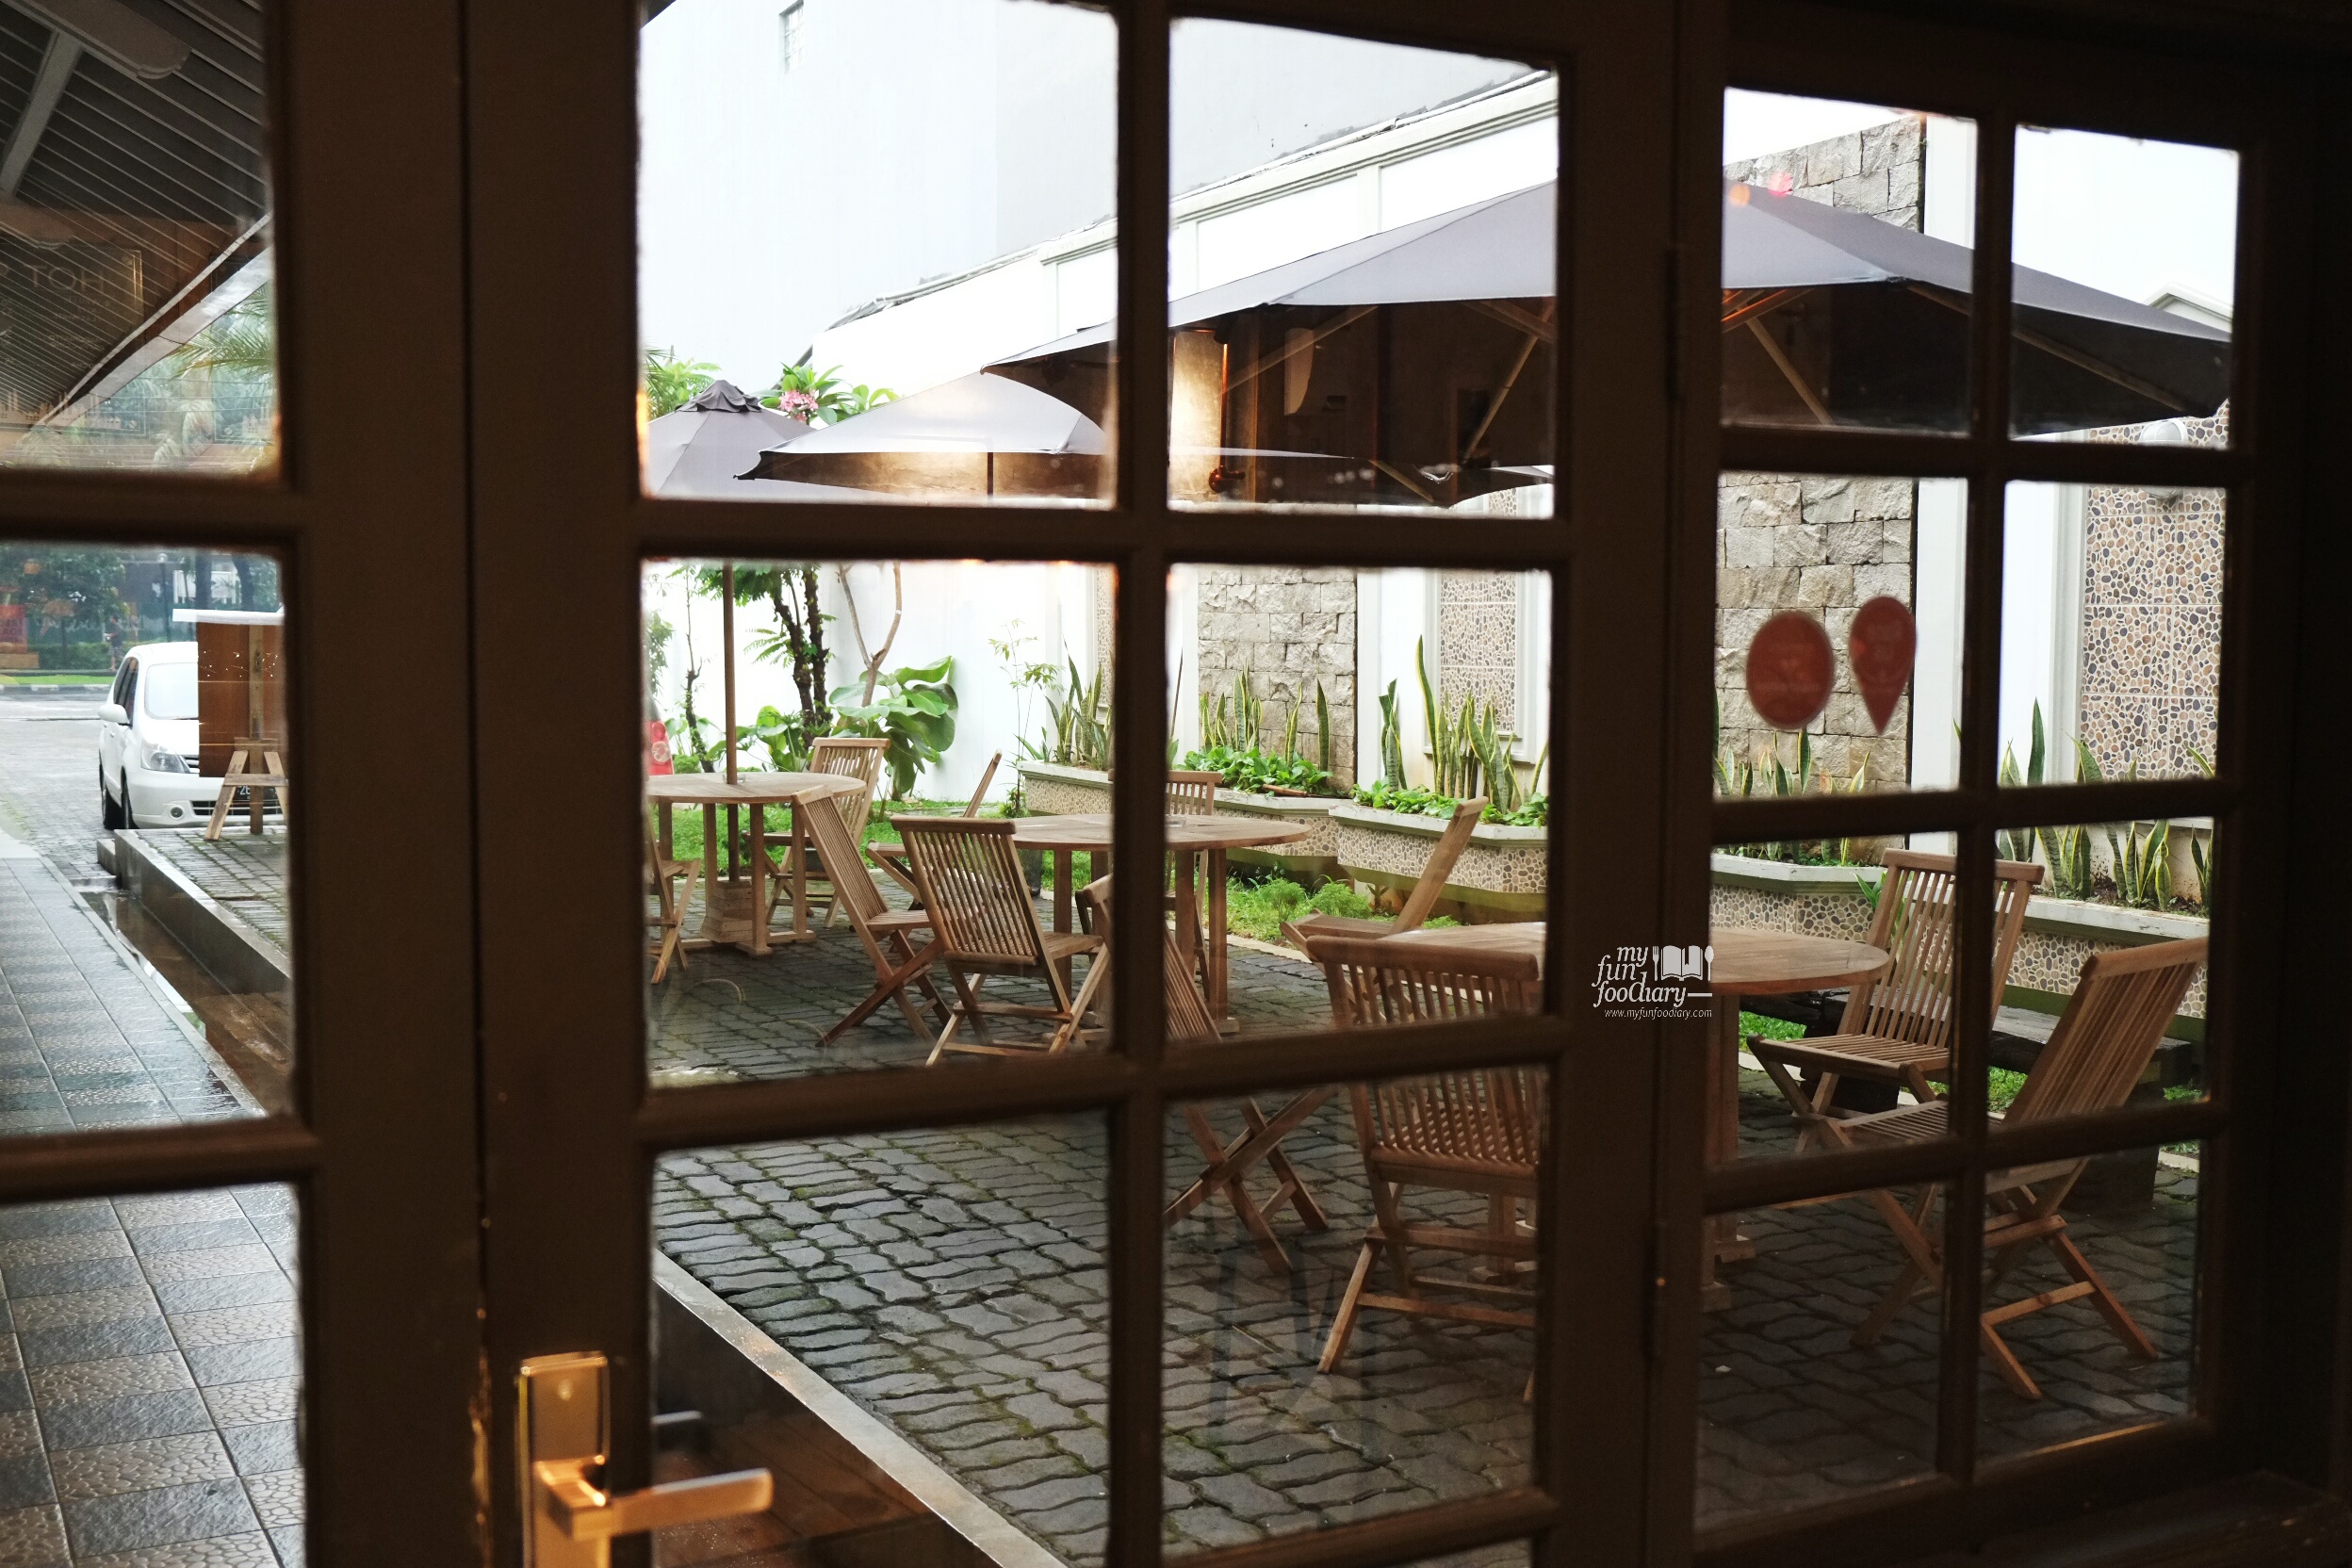 Outdoor View from the Window at WATT Coffee by Myfunfoodiary